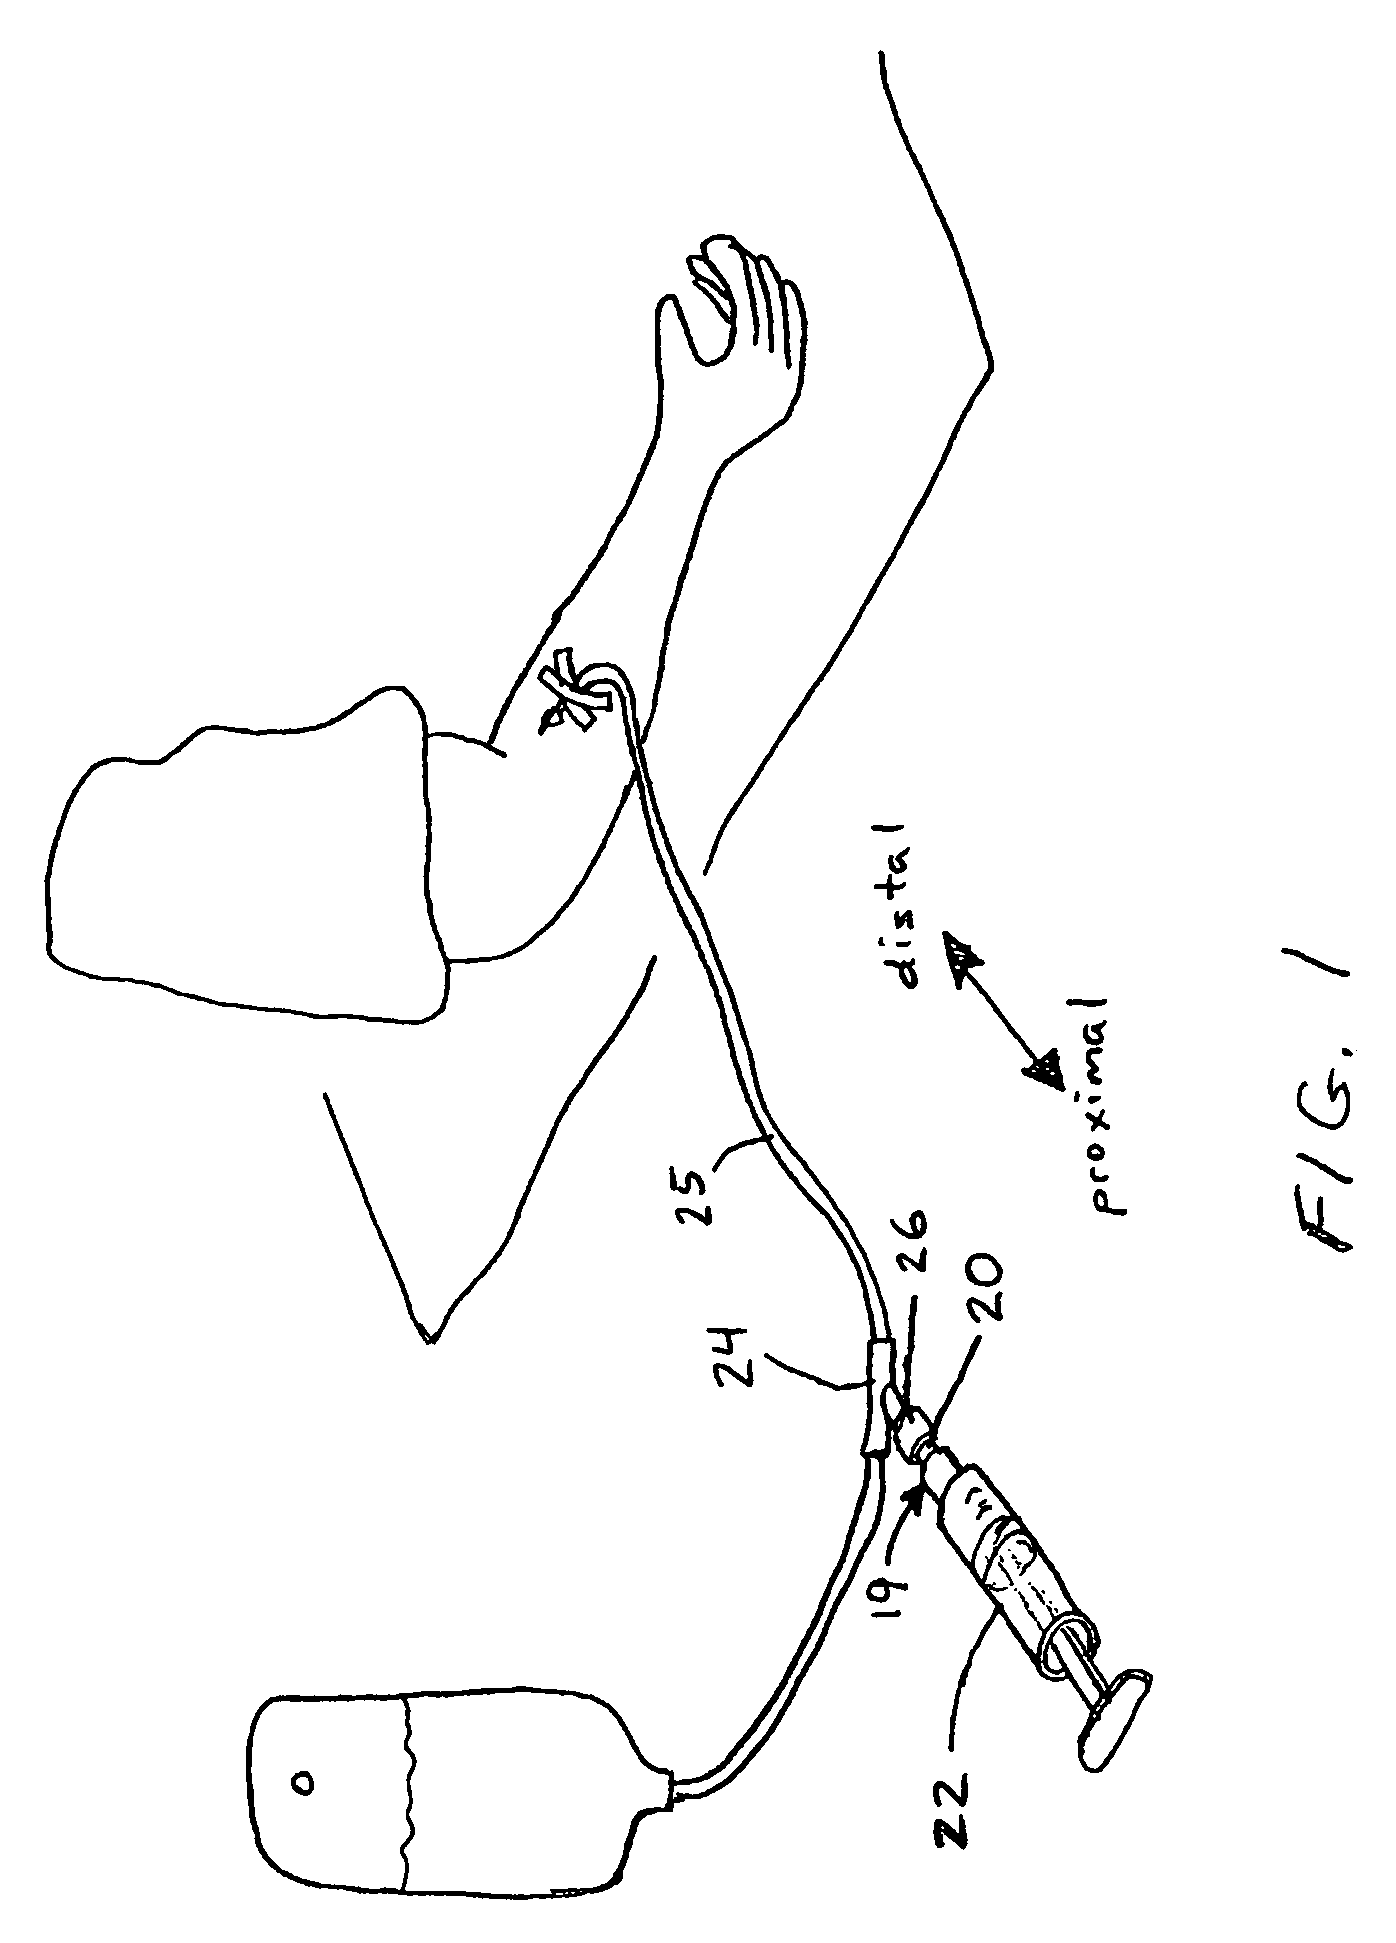 Self-sealing male luer connector with biased valve plug